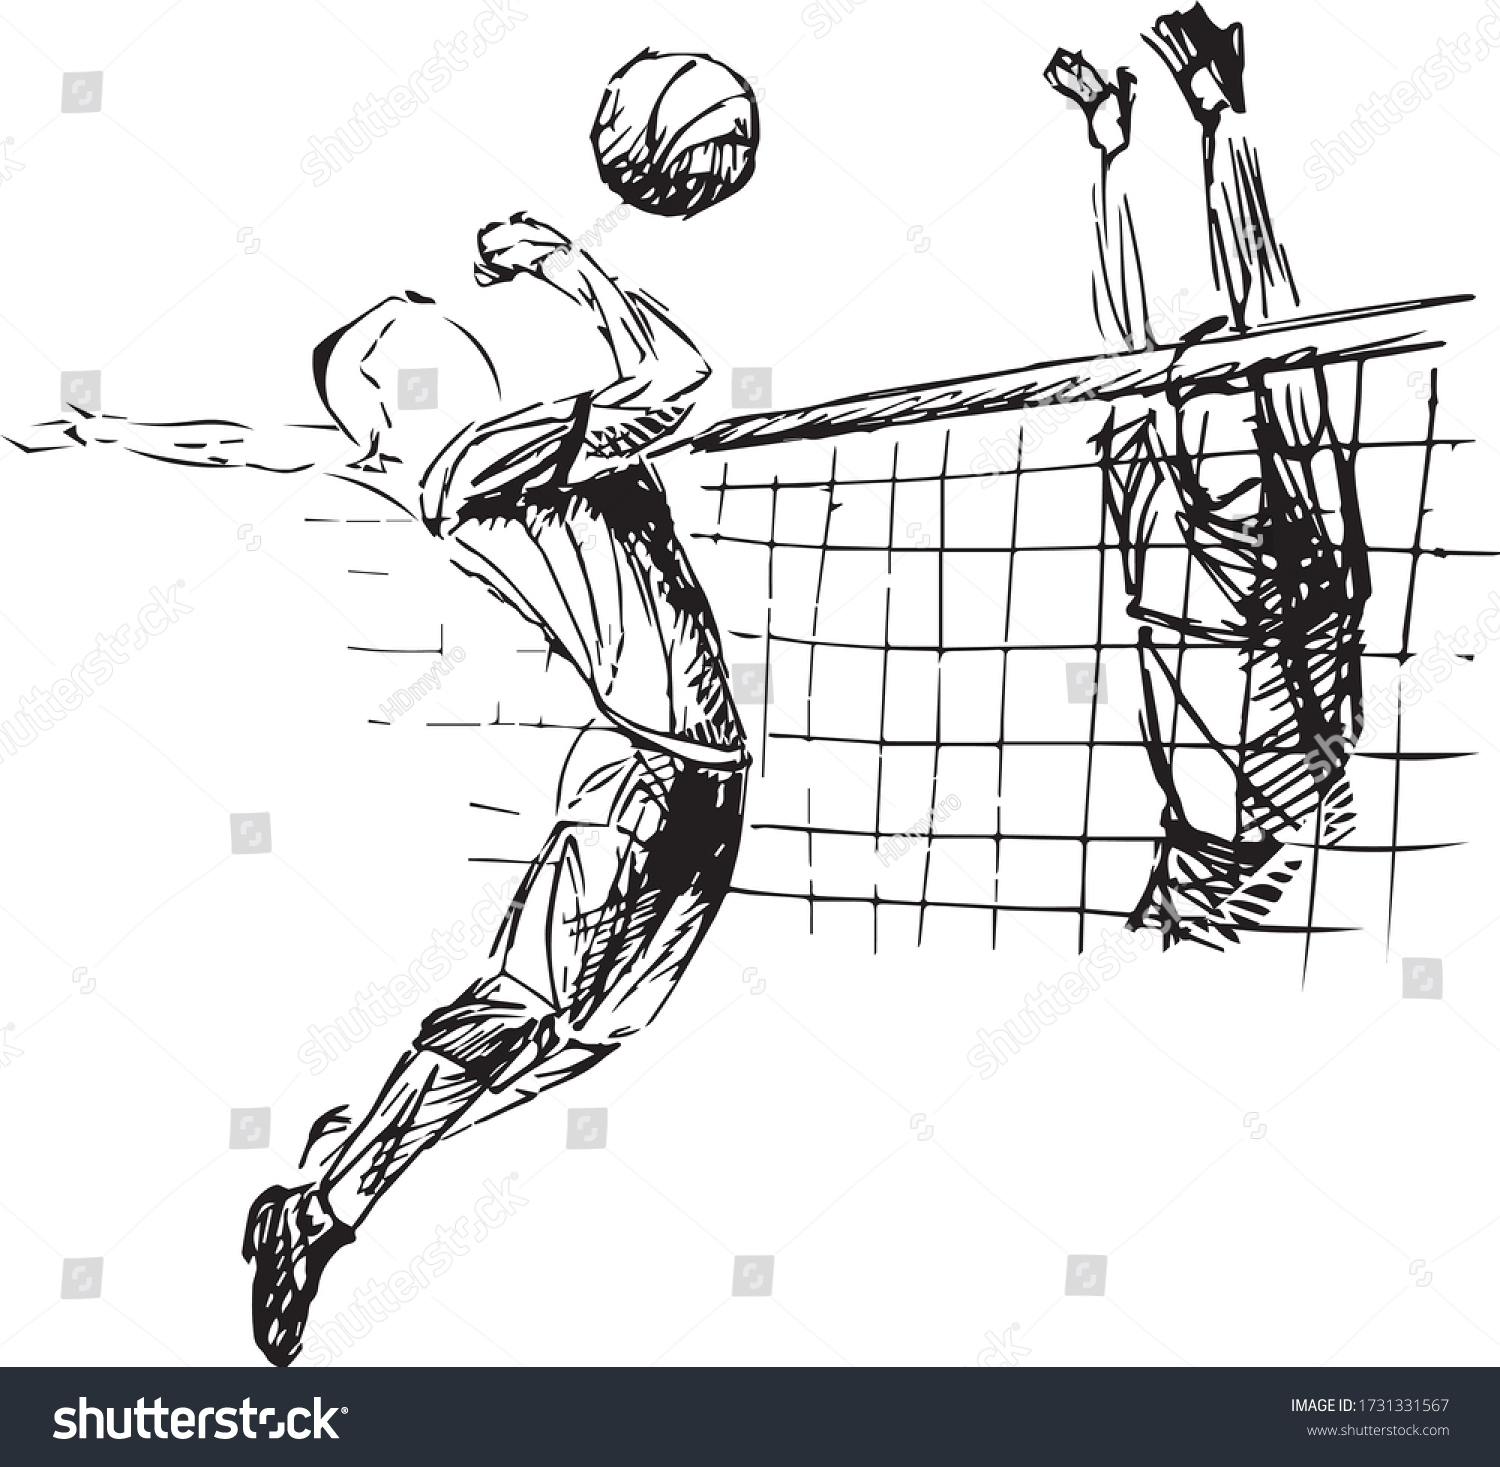 Hand sketch volleyball player. Beach volleyball Royalty Free Stock